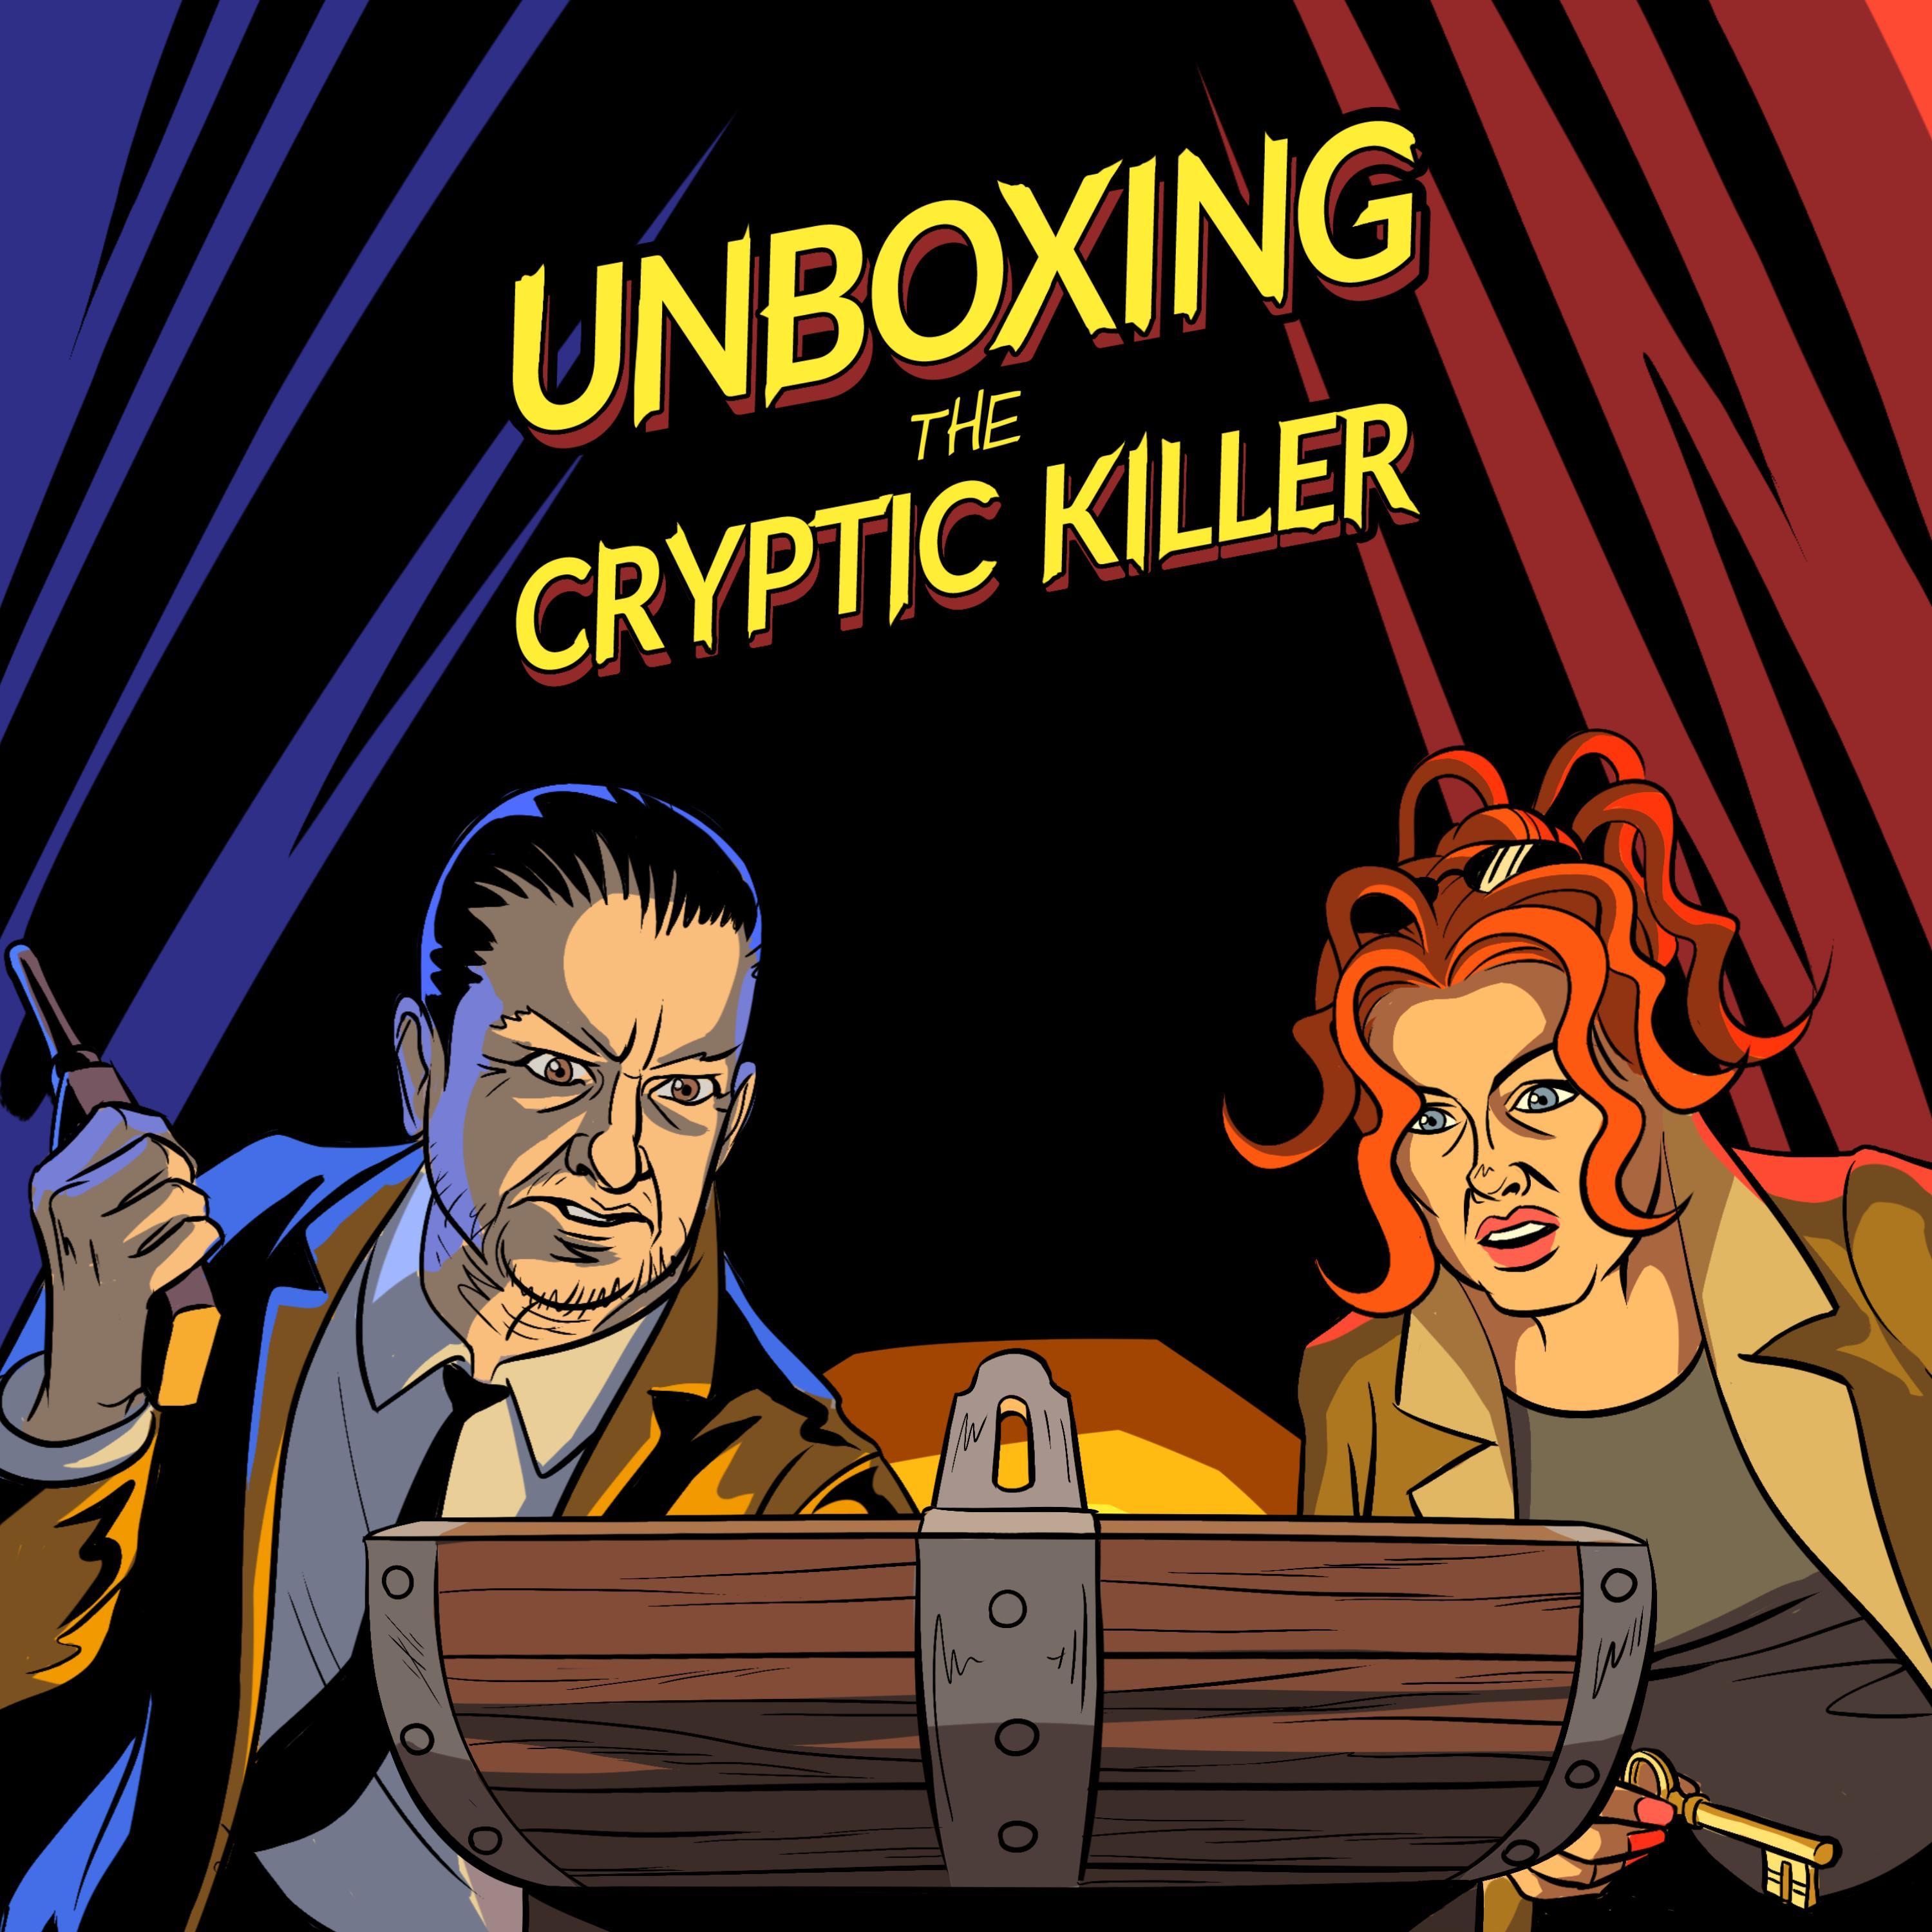 Unboxing the cryptic killer полная. Unboxing the Cryptic Killer. Unboxing the Cryptic Killer ответы. Unboxing the Cryptic Killer ФРИТП. Unboxing the Cryptic Killer второй квест.